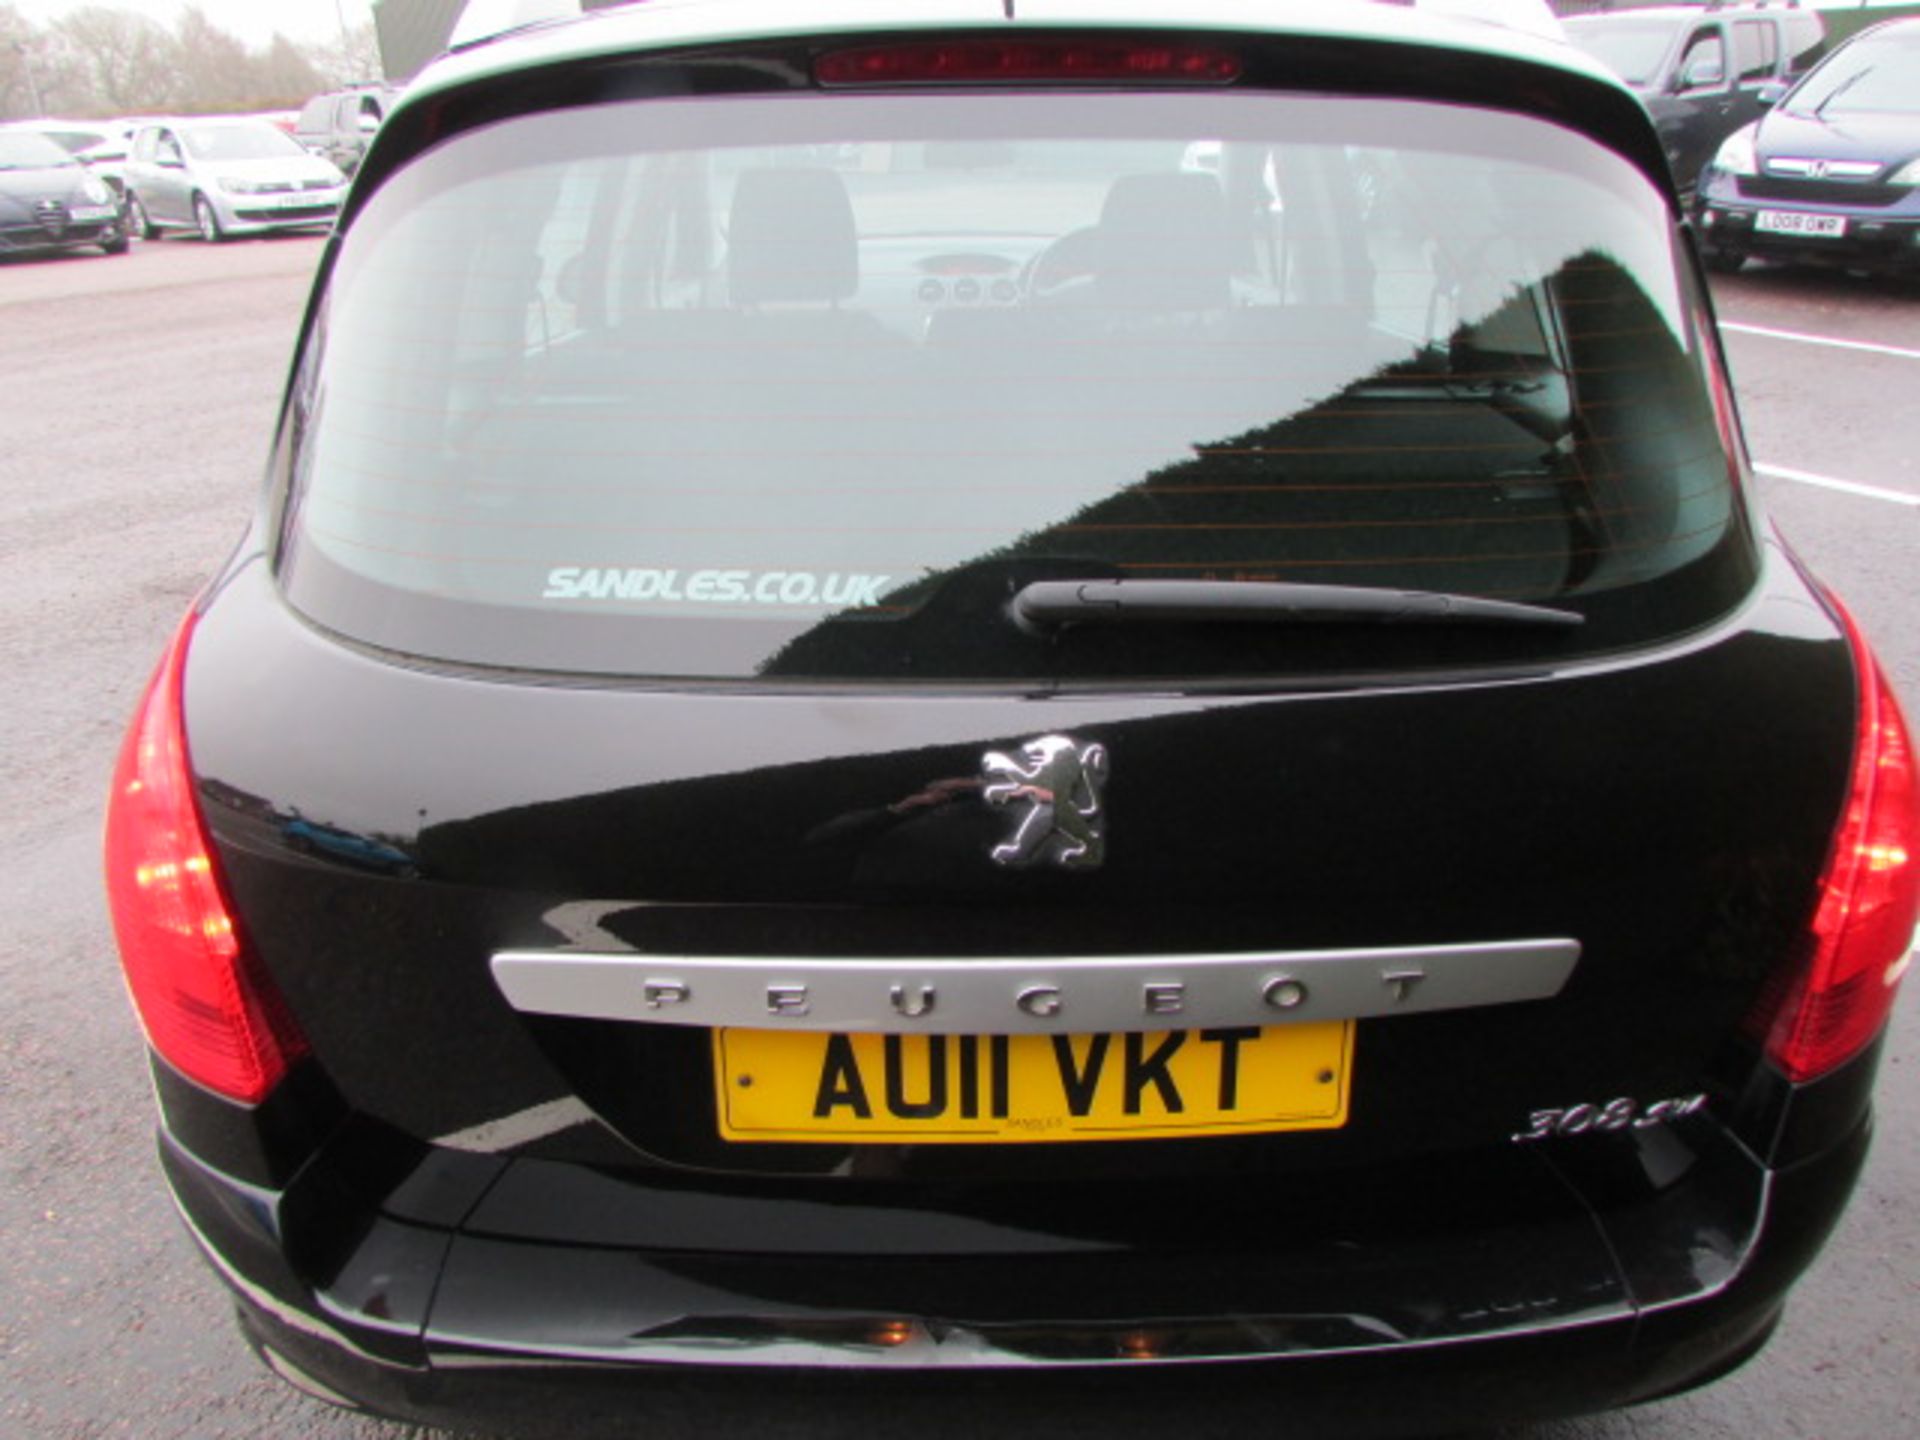 11 11 Peugeot 308 Sport SW HDI 112 - Image 2 of 25